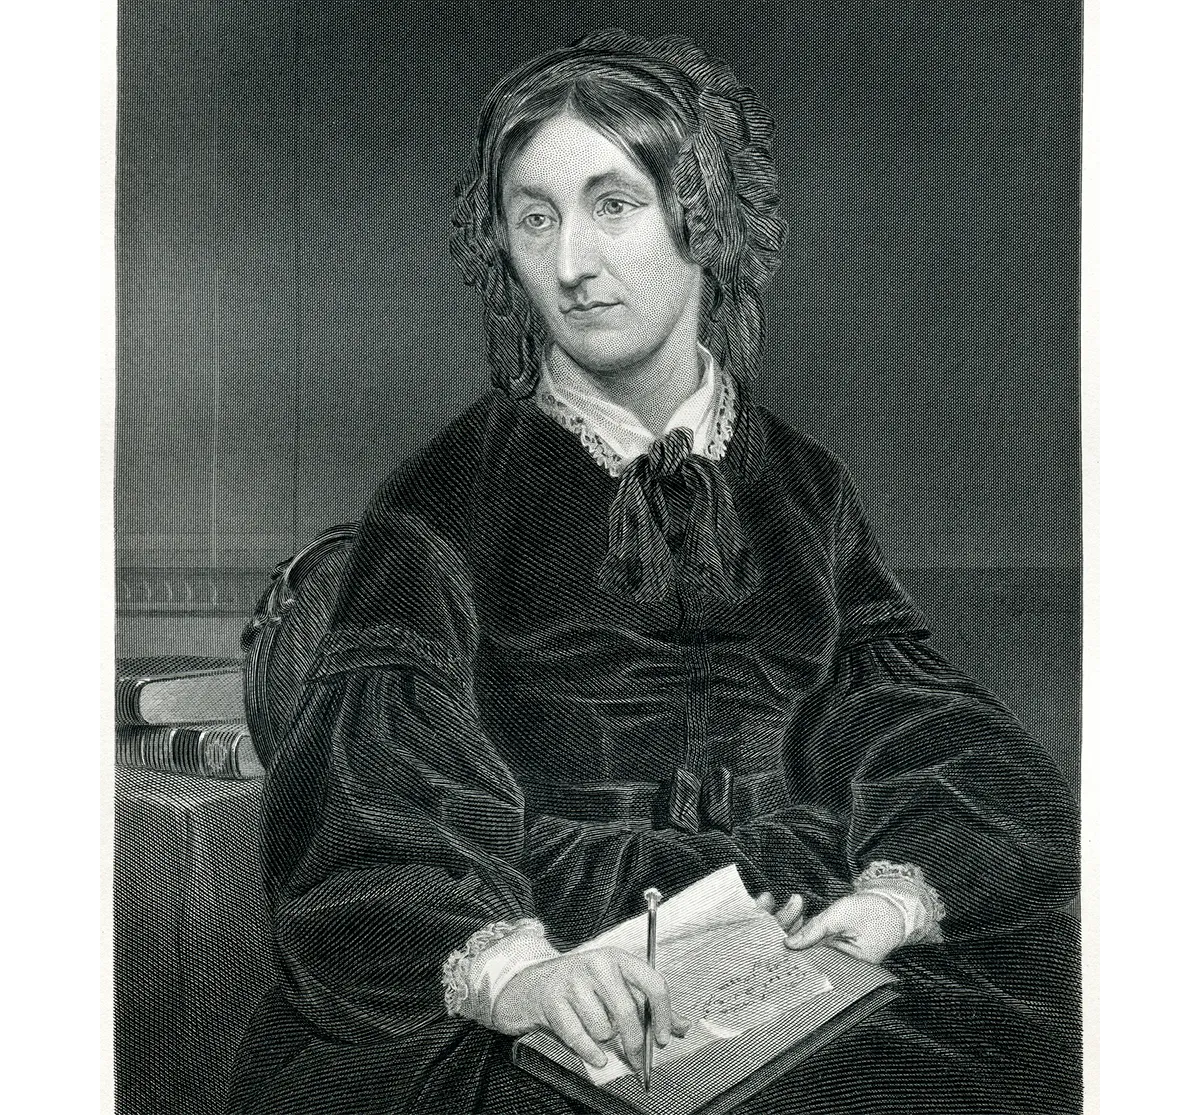 An engraving of Mary Somerville from 1873. Credit: traveler1116 / Getty Images